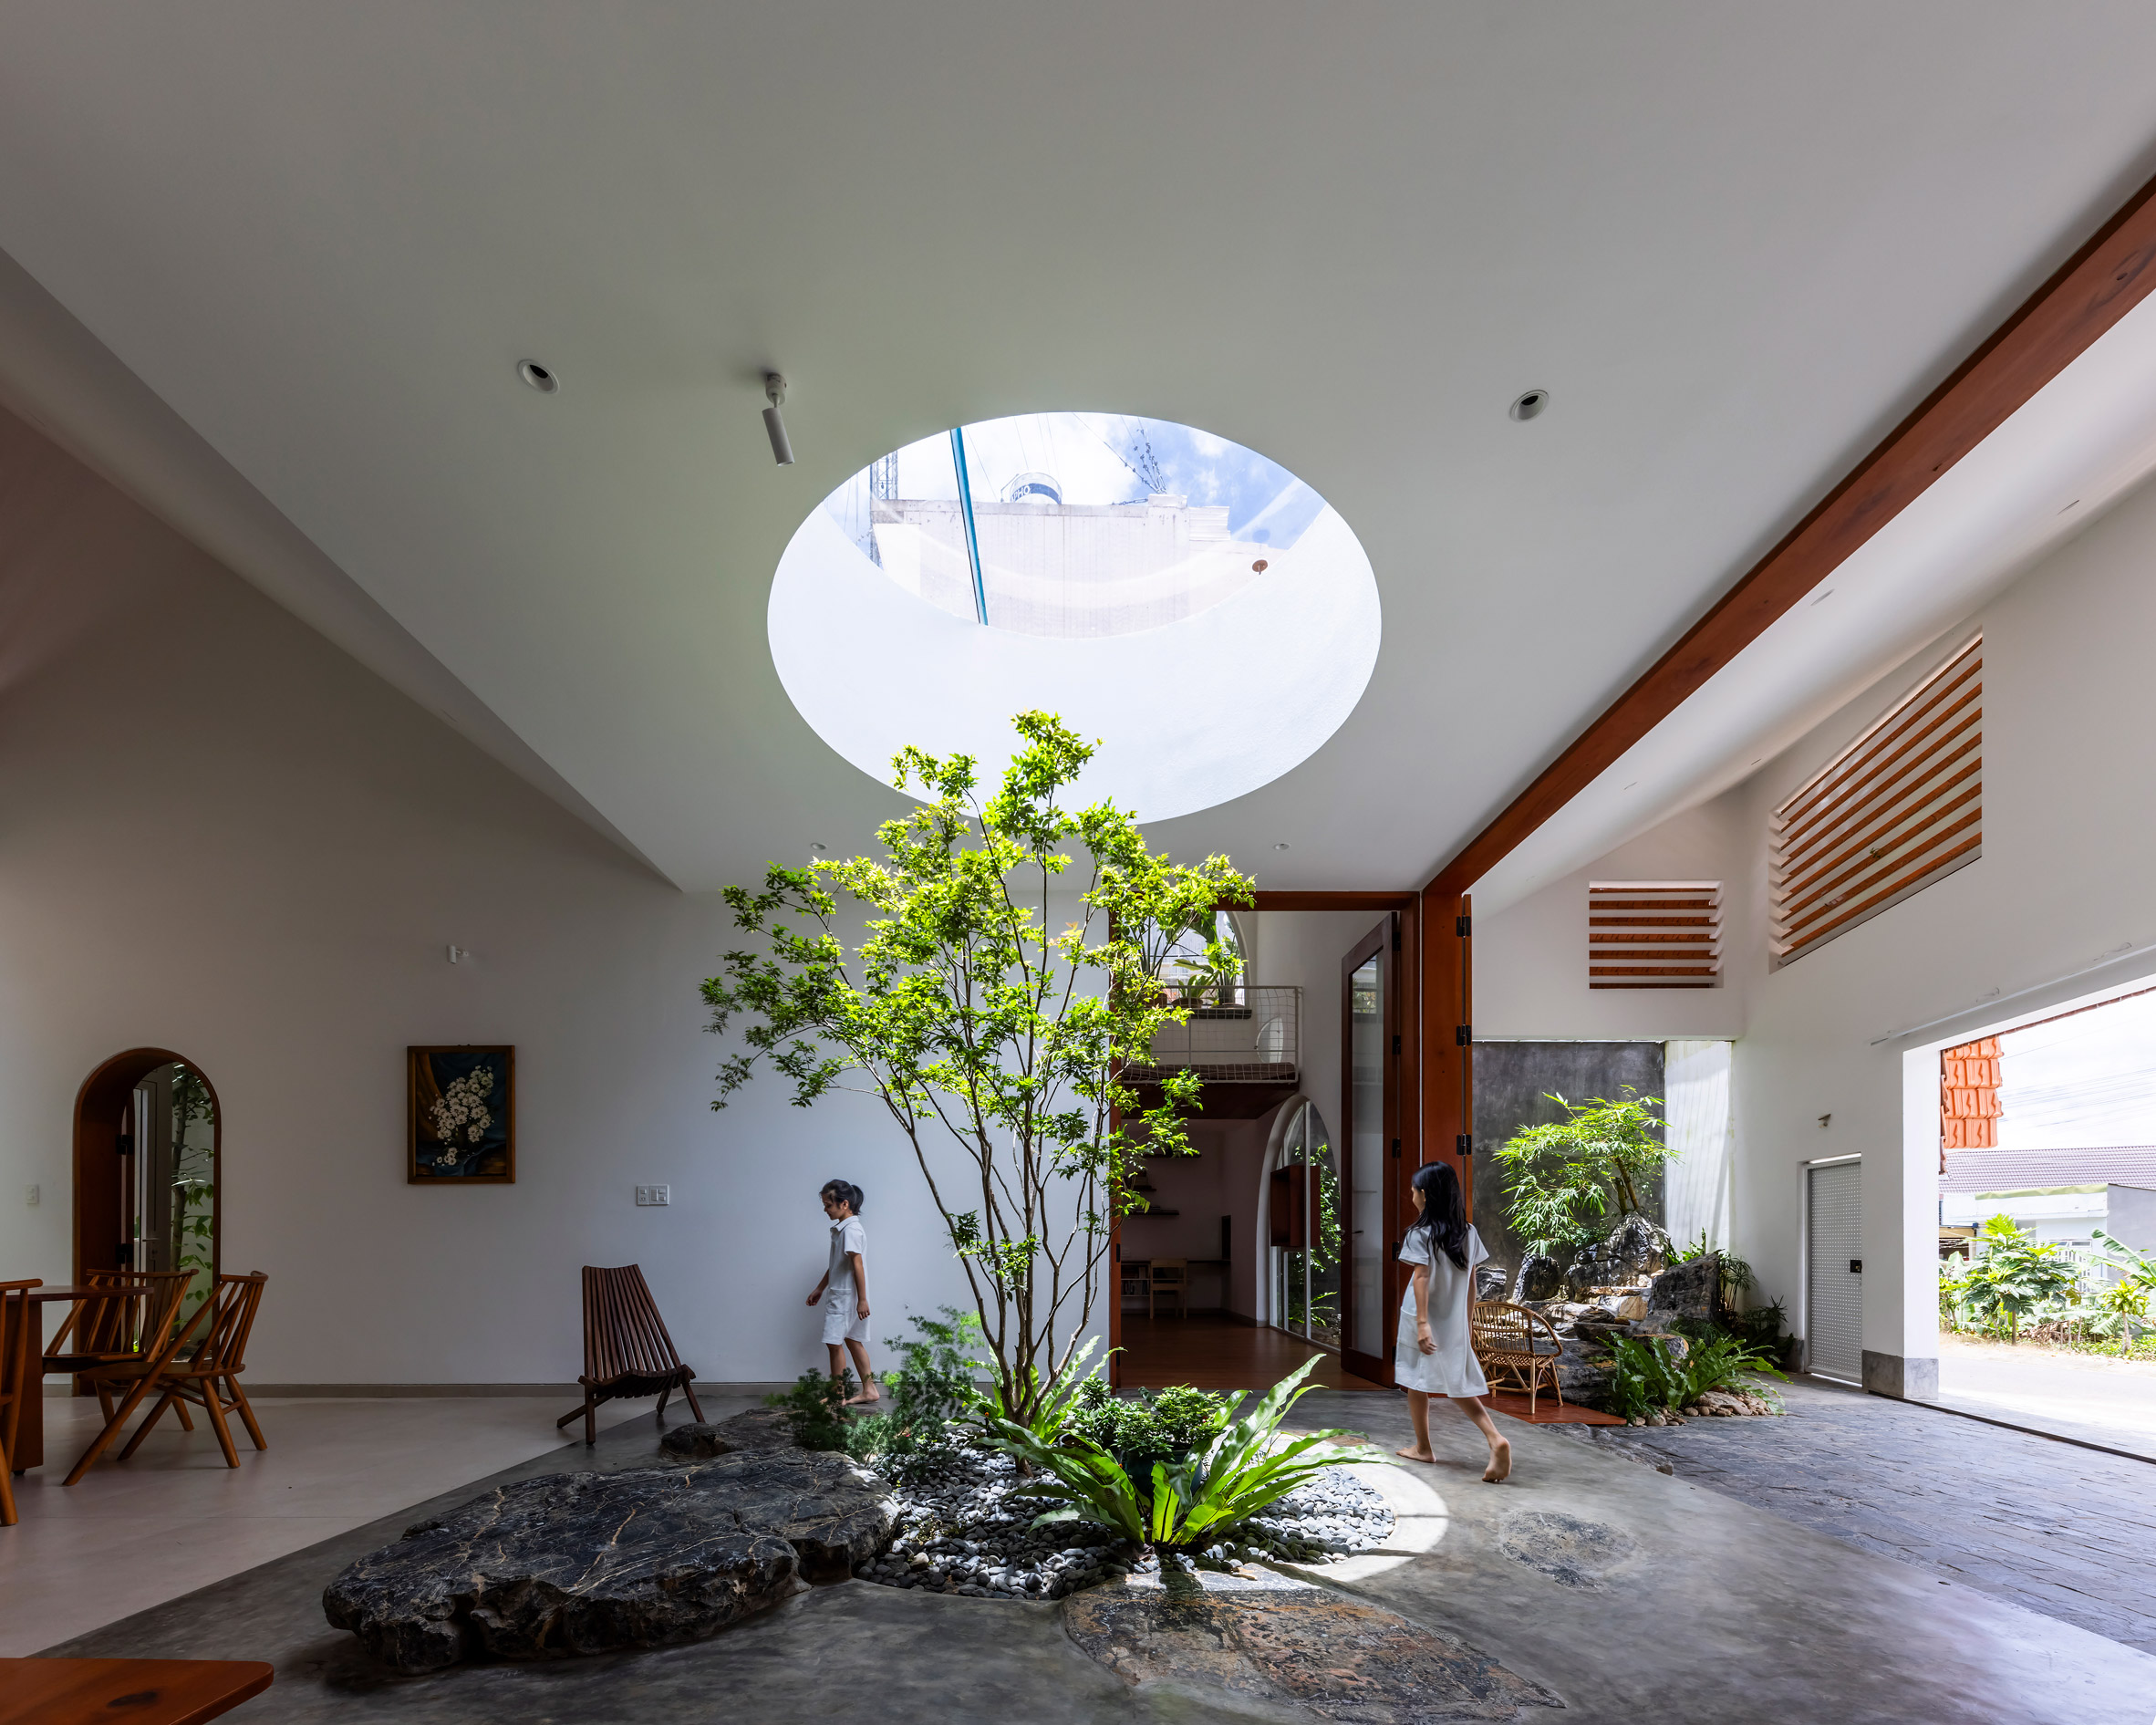 Oculus lighting an internal planted tree in a home in Vietnam